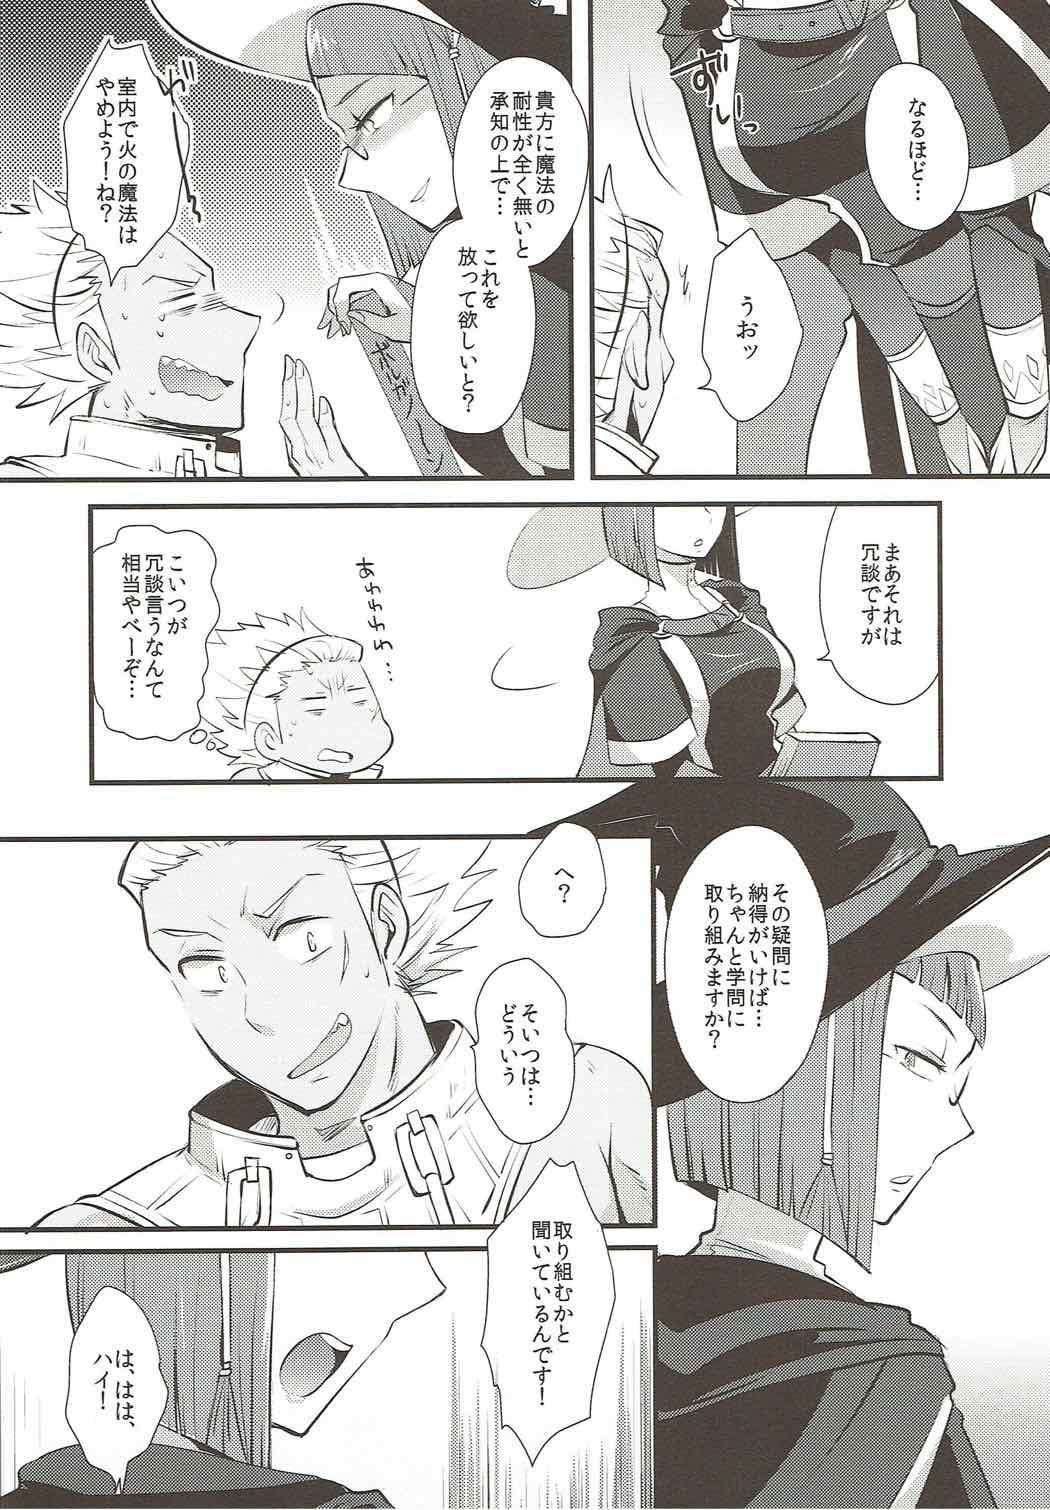 Transexual Study Steady - Fire emblem awakening Real Amateur - Page 5